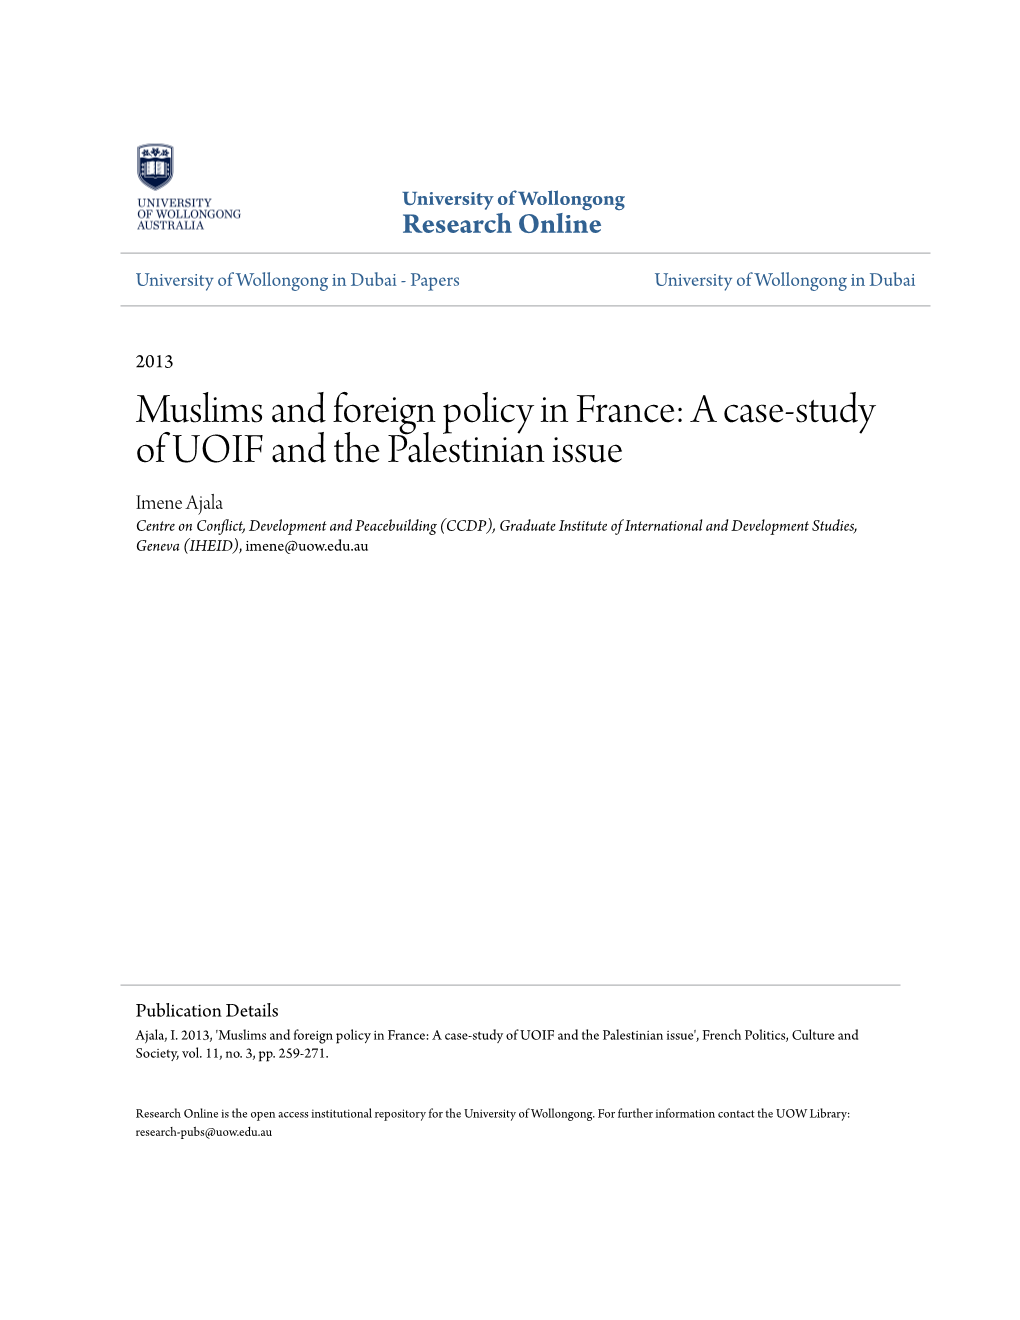 Muslims and Foreign Policy in France: a Case-Study of UOIF and The